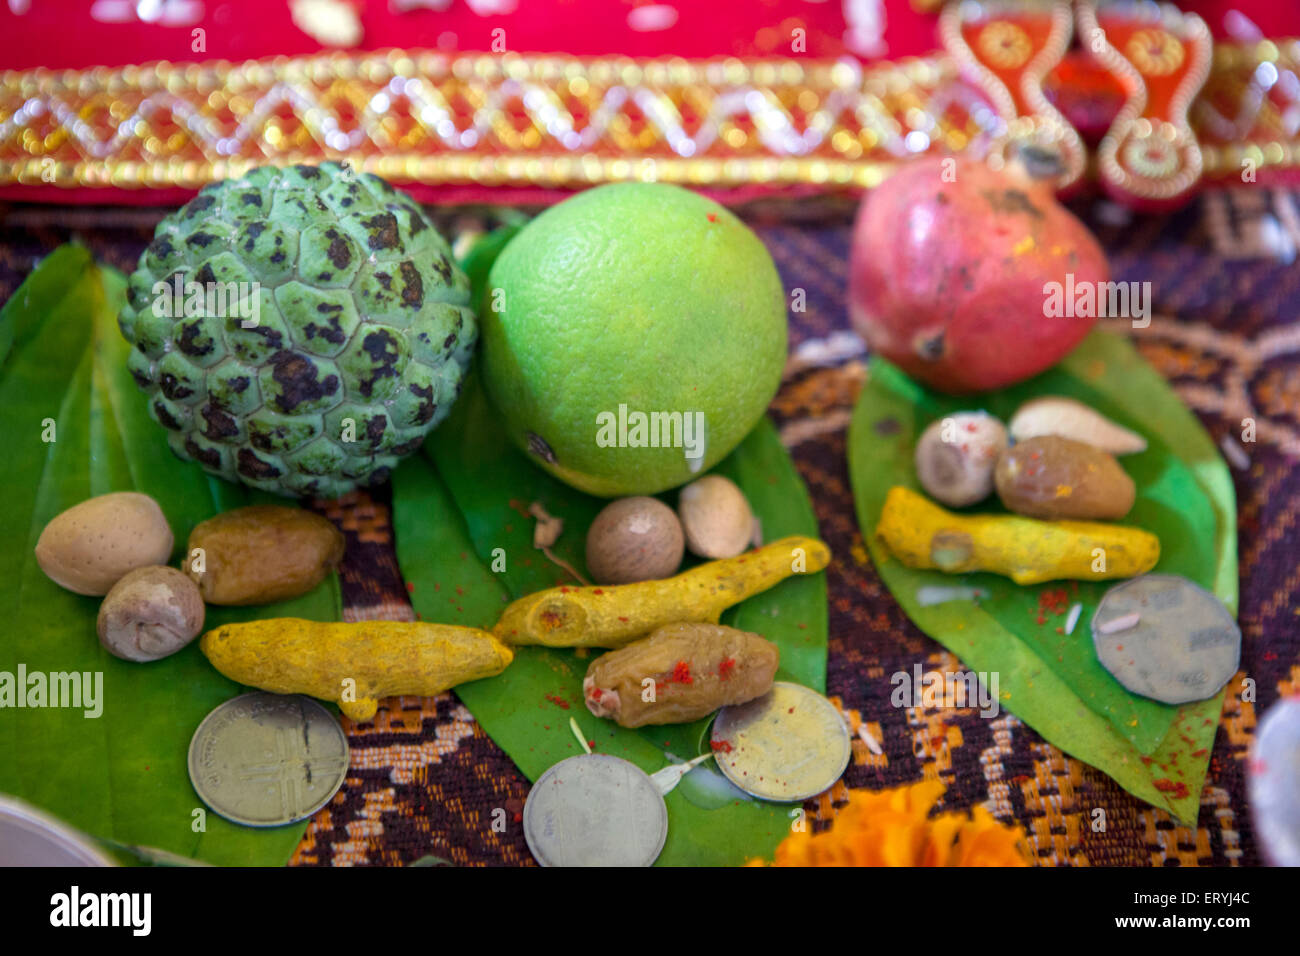 fruits offering for pooja India Asia Stock Photo